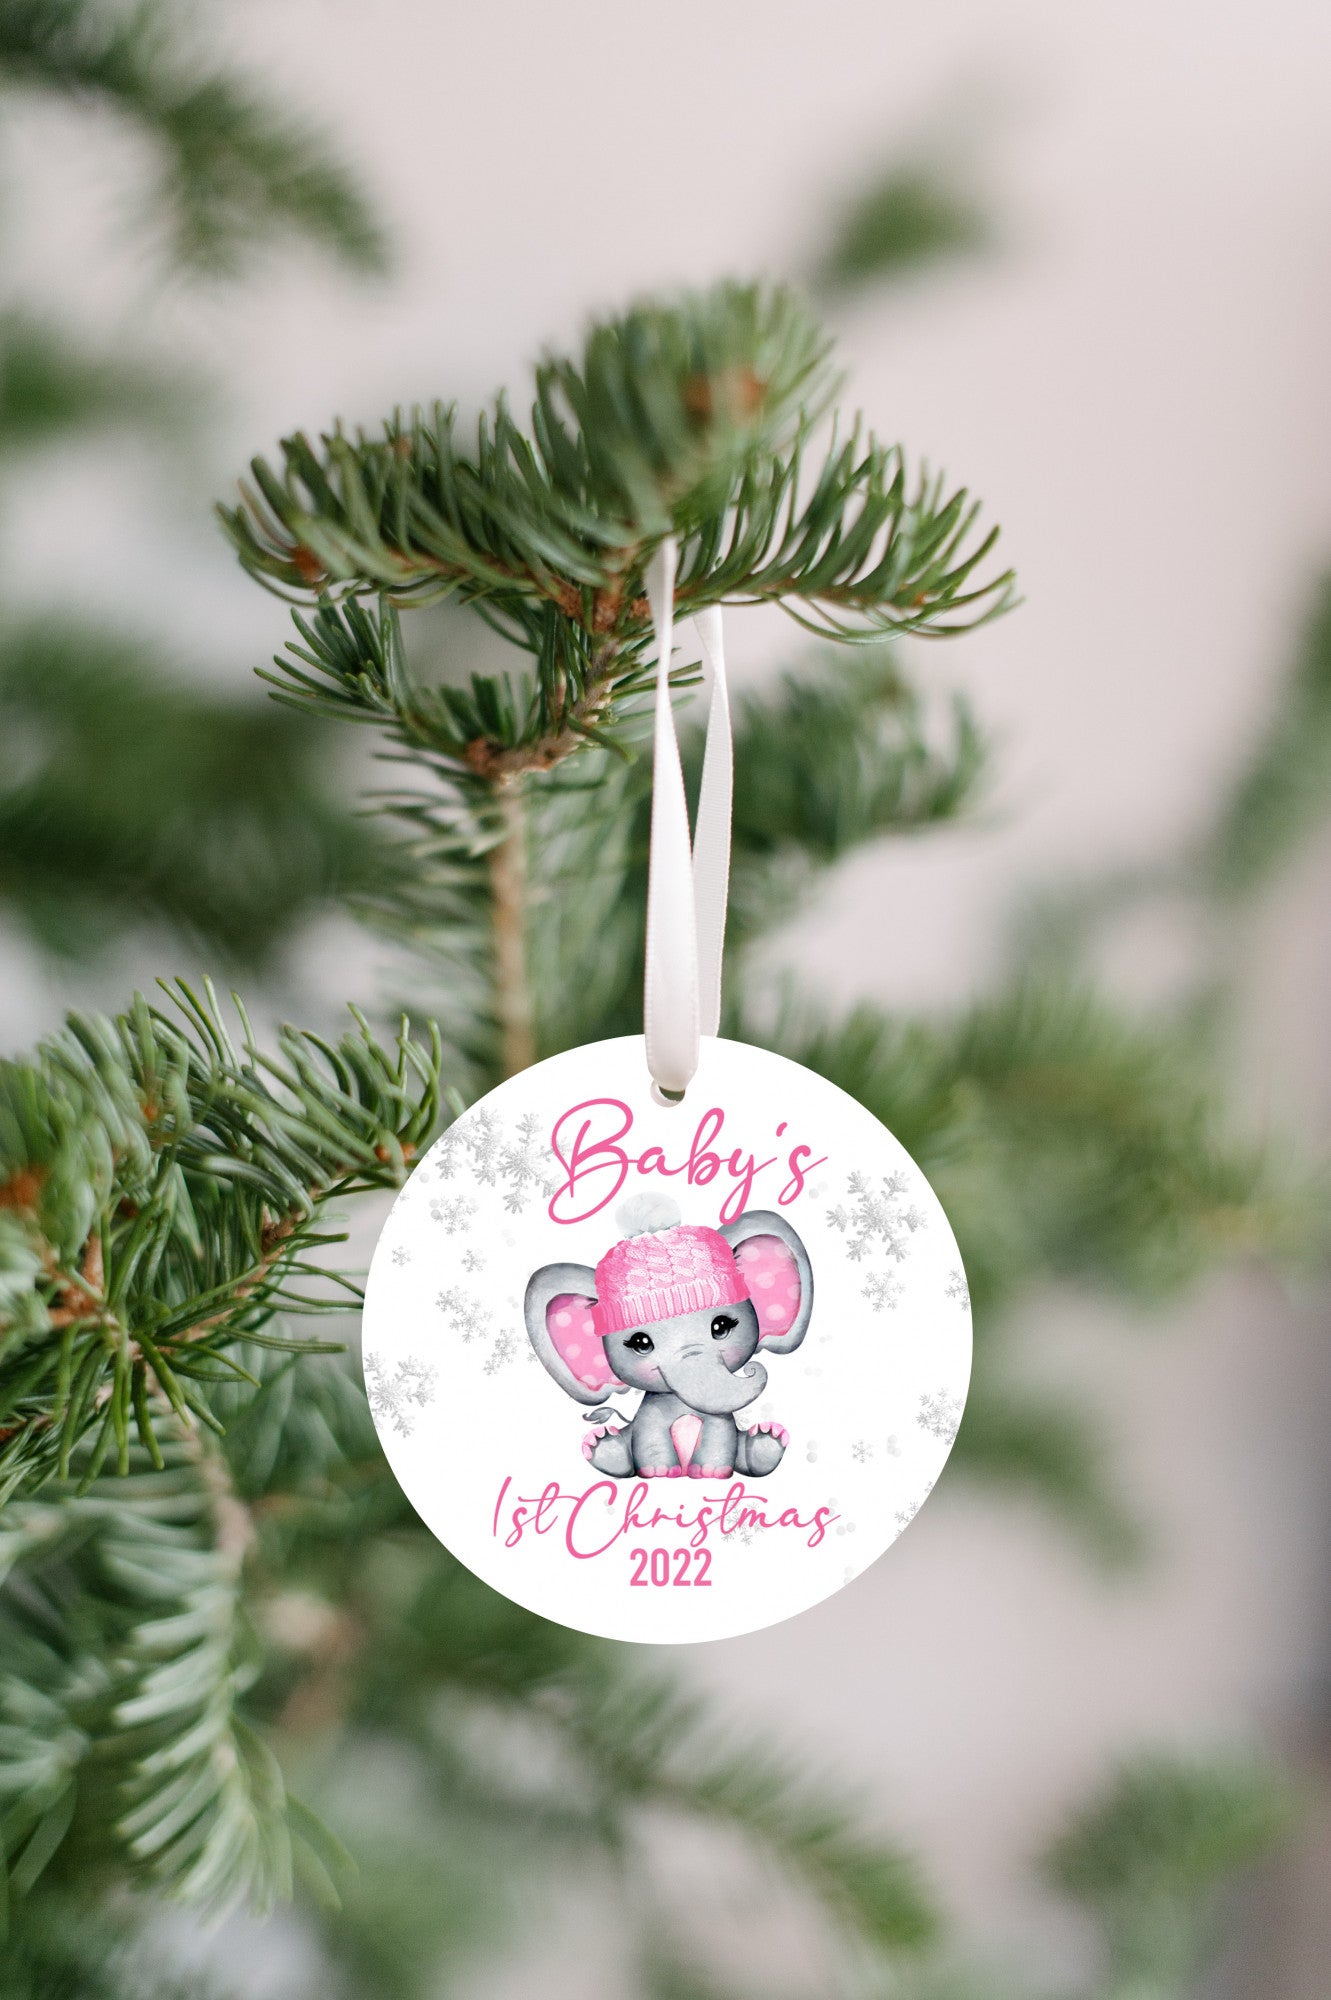 Baby's 1st Christmas 2022 Pink Elephant Ornament